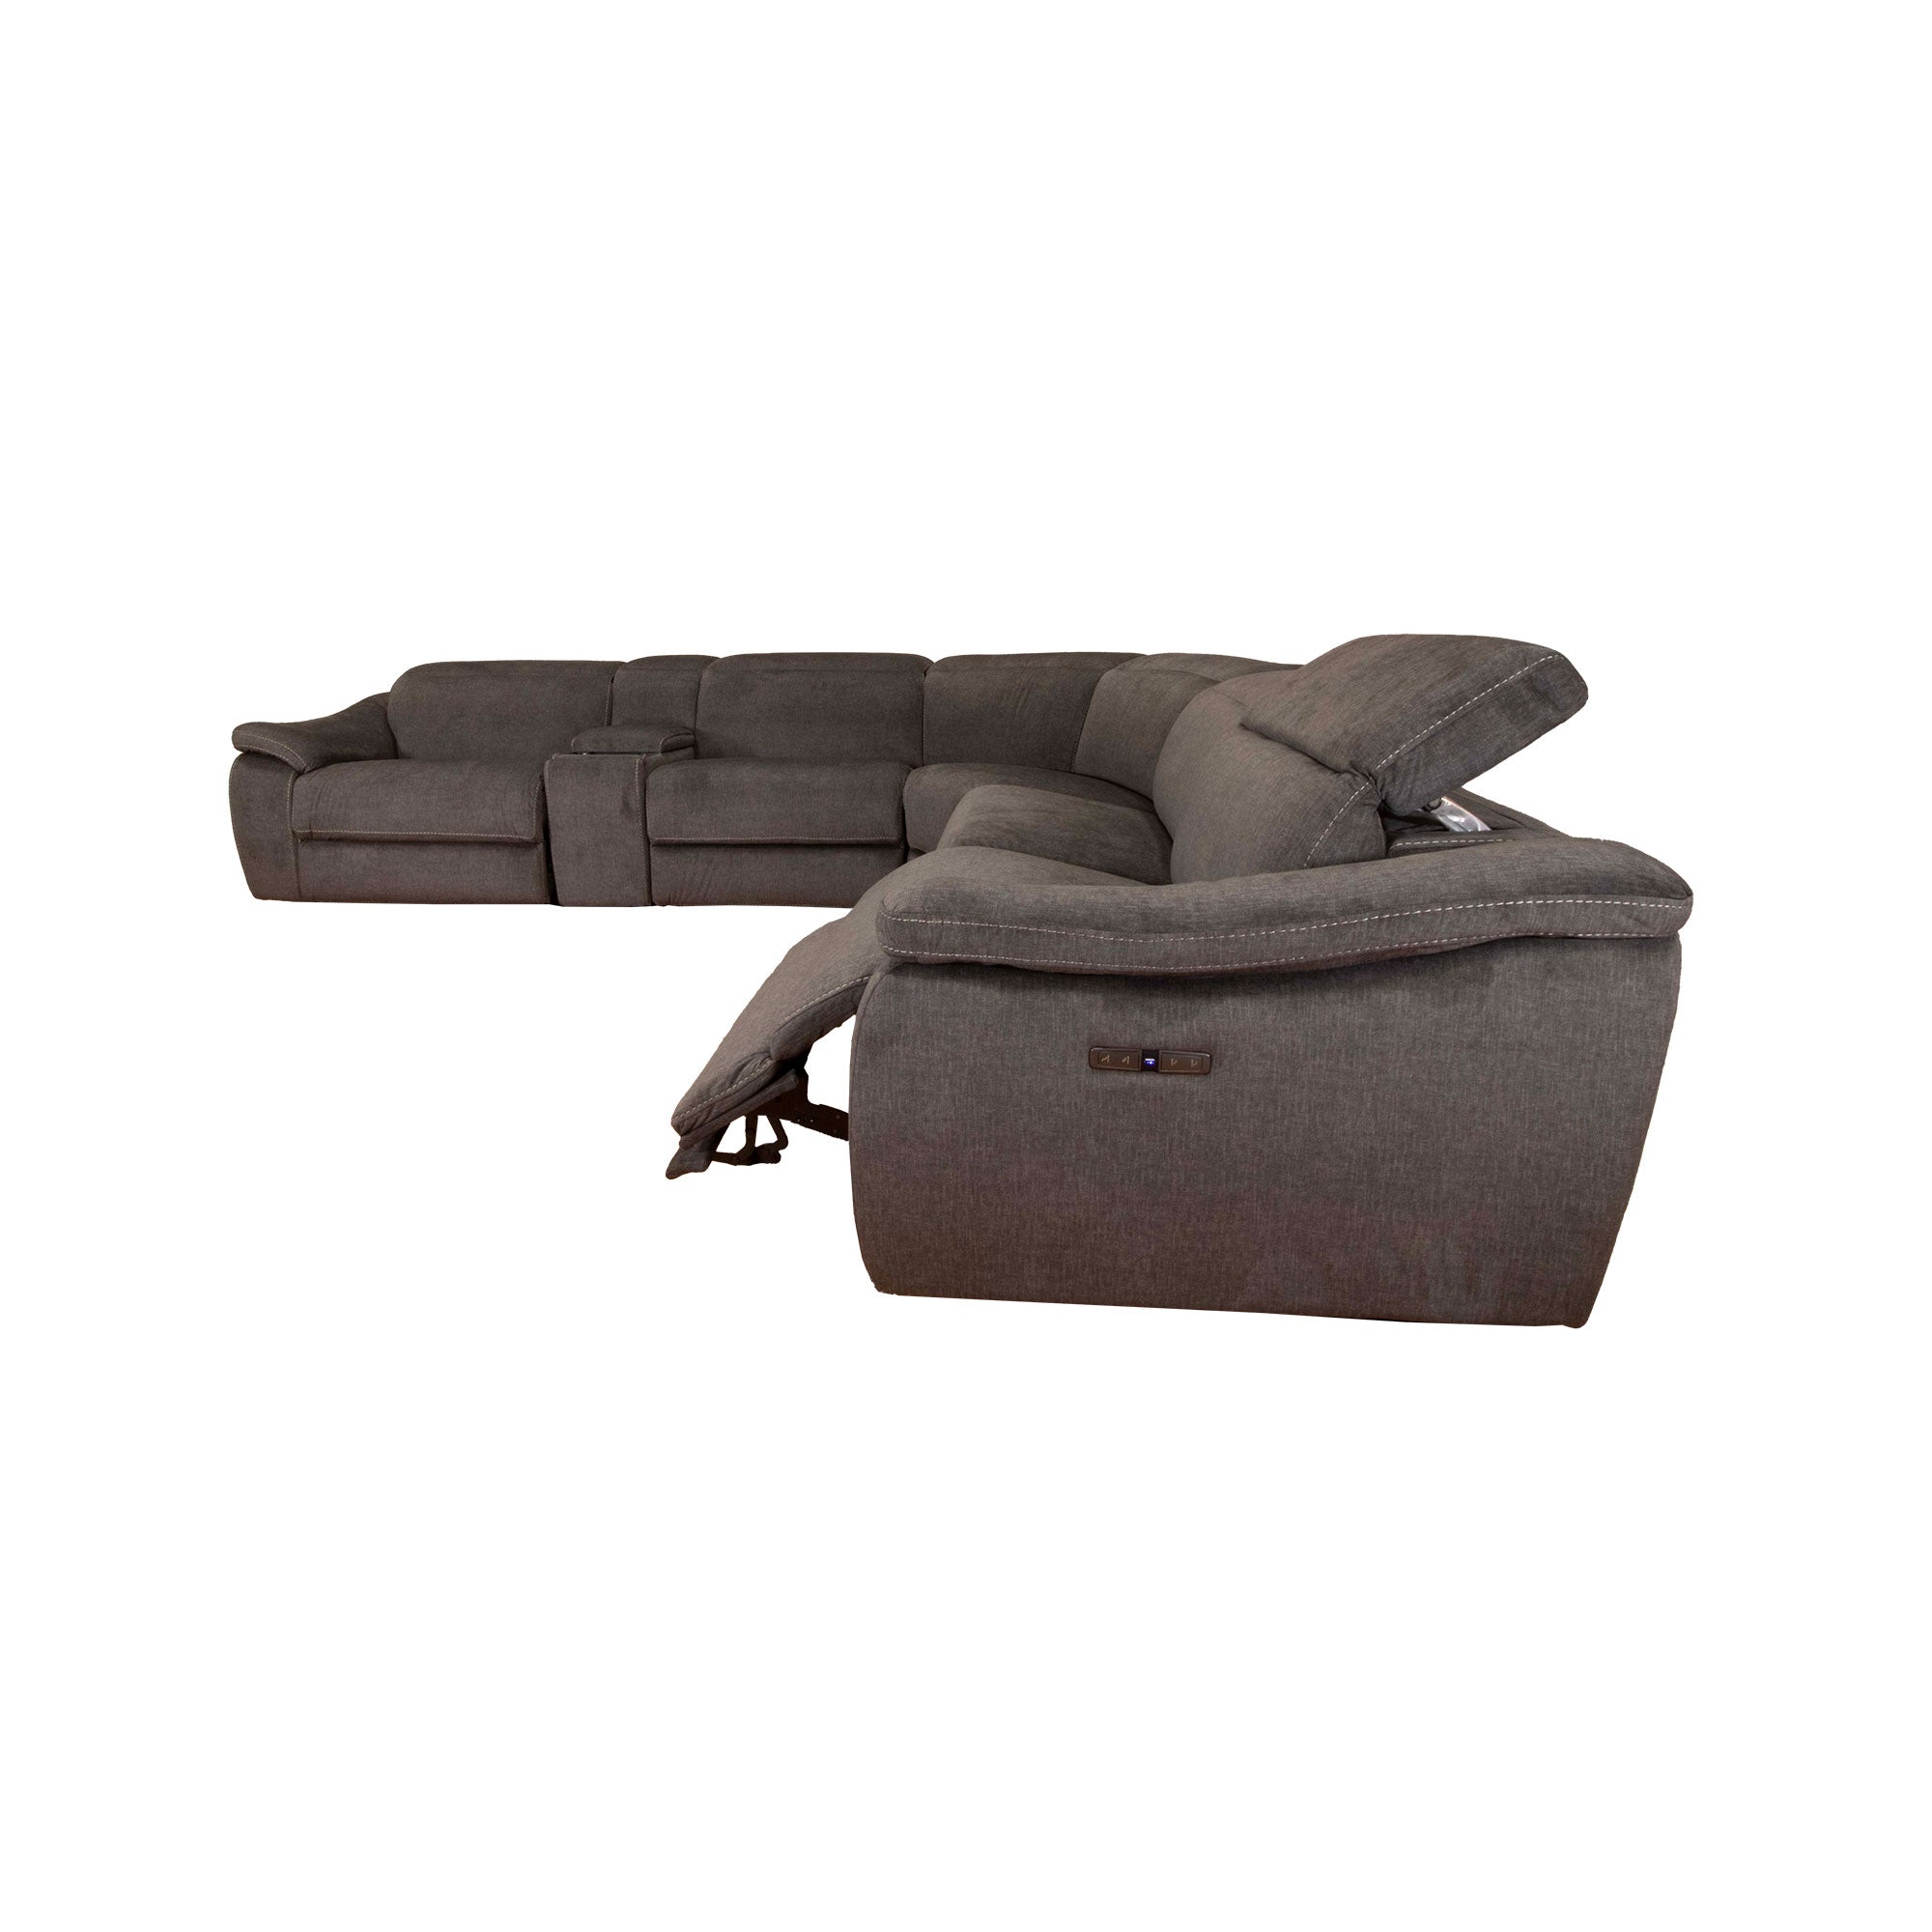 Chazz Reclining Sectional